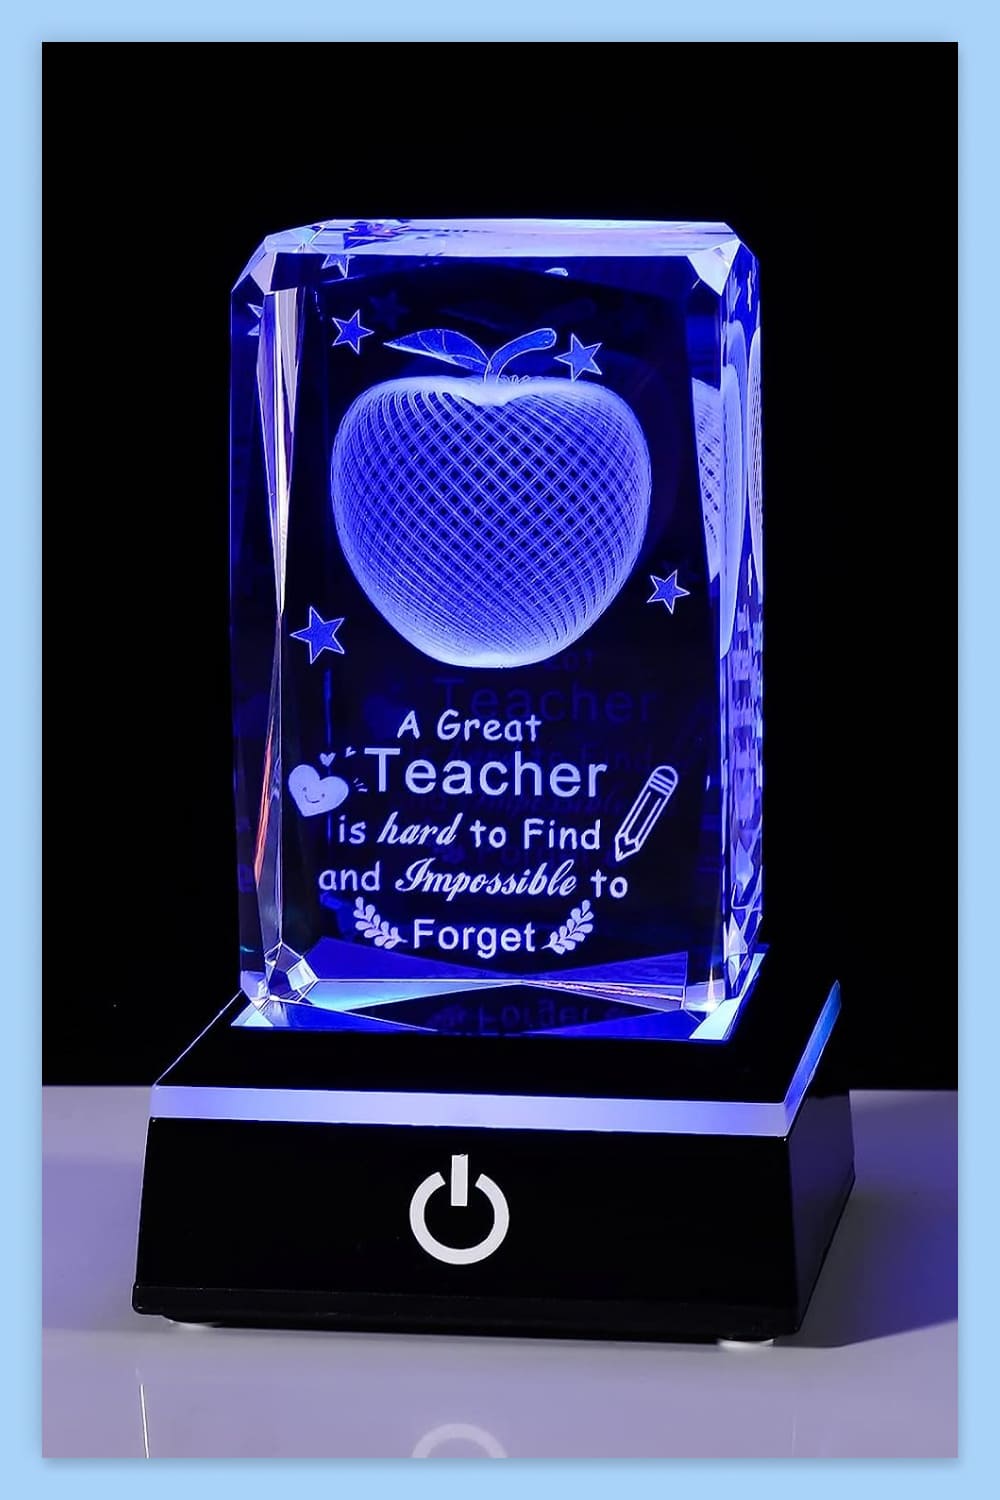 3D Crystal Engrave Apple with Base.